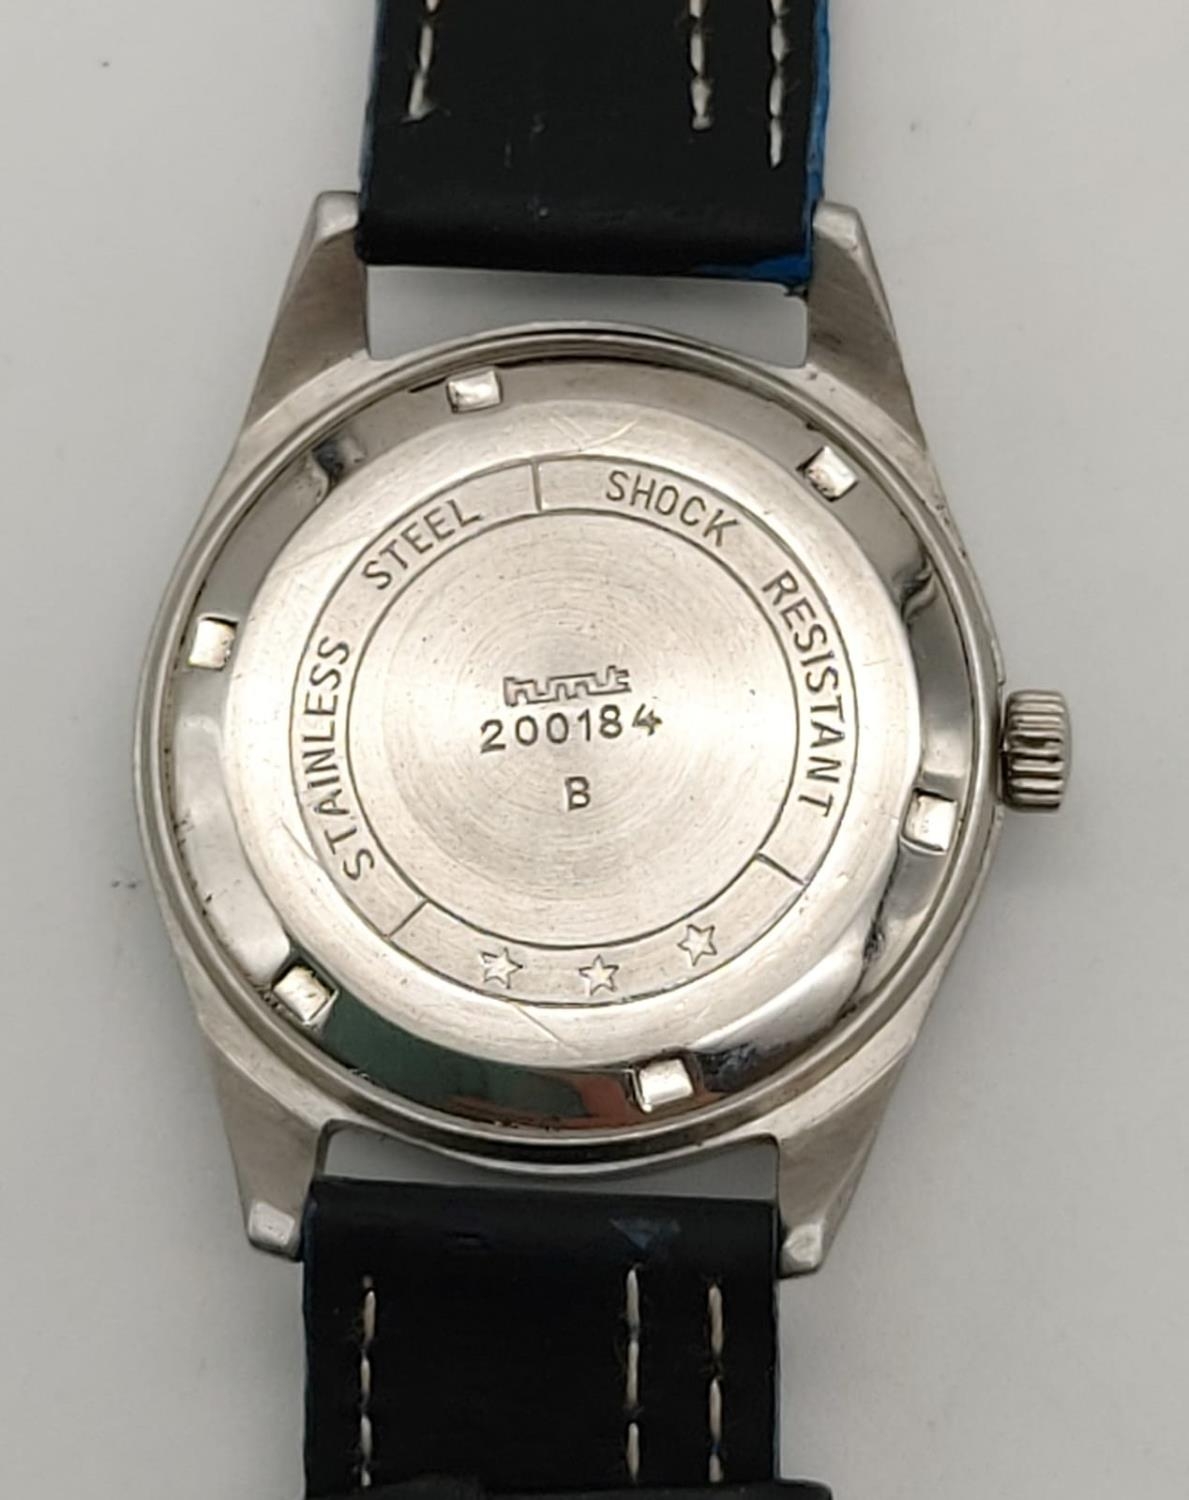 A HMT Blue Dial Jawan Watch. New leather strap. Good condition in working order. - Image 5 of 6